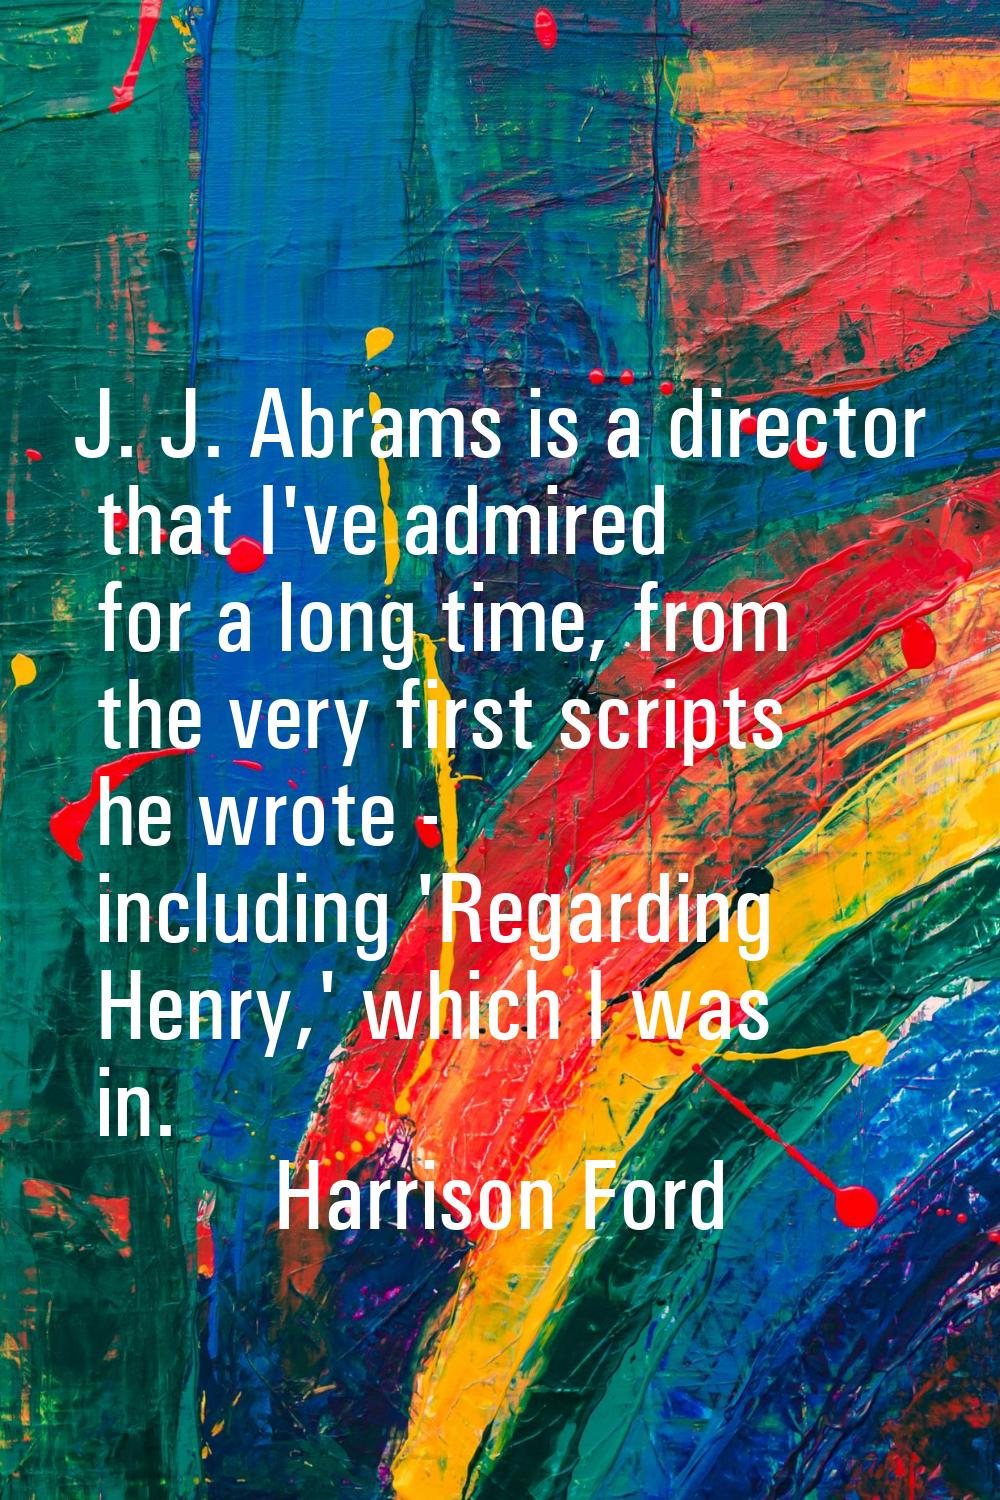 J. J. Abrams is a director that I've admired for a long time, from the very first scripts he wrote 